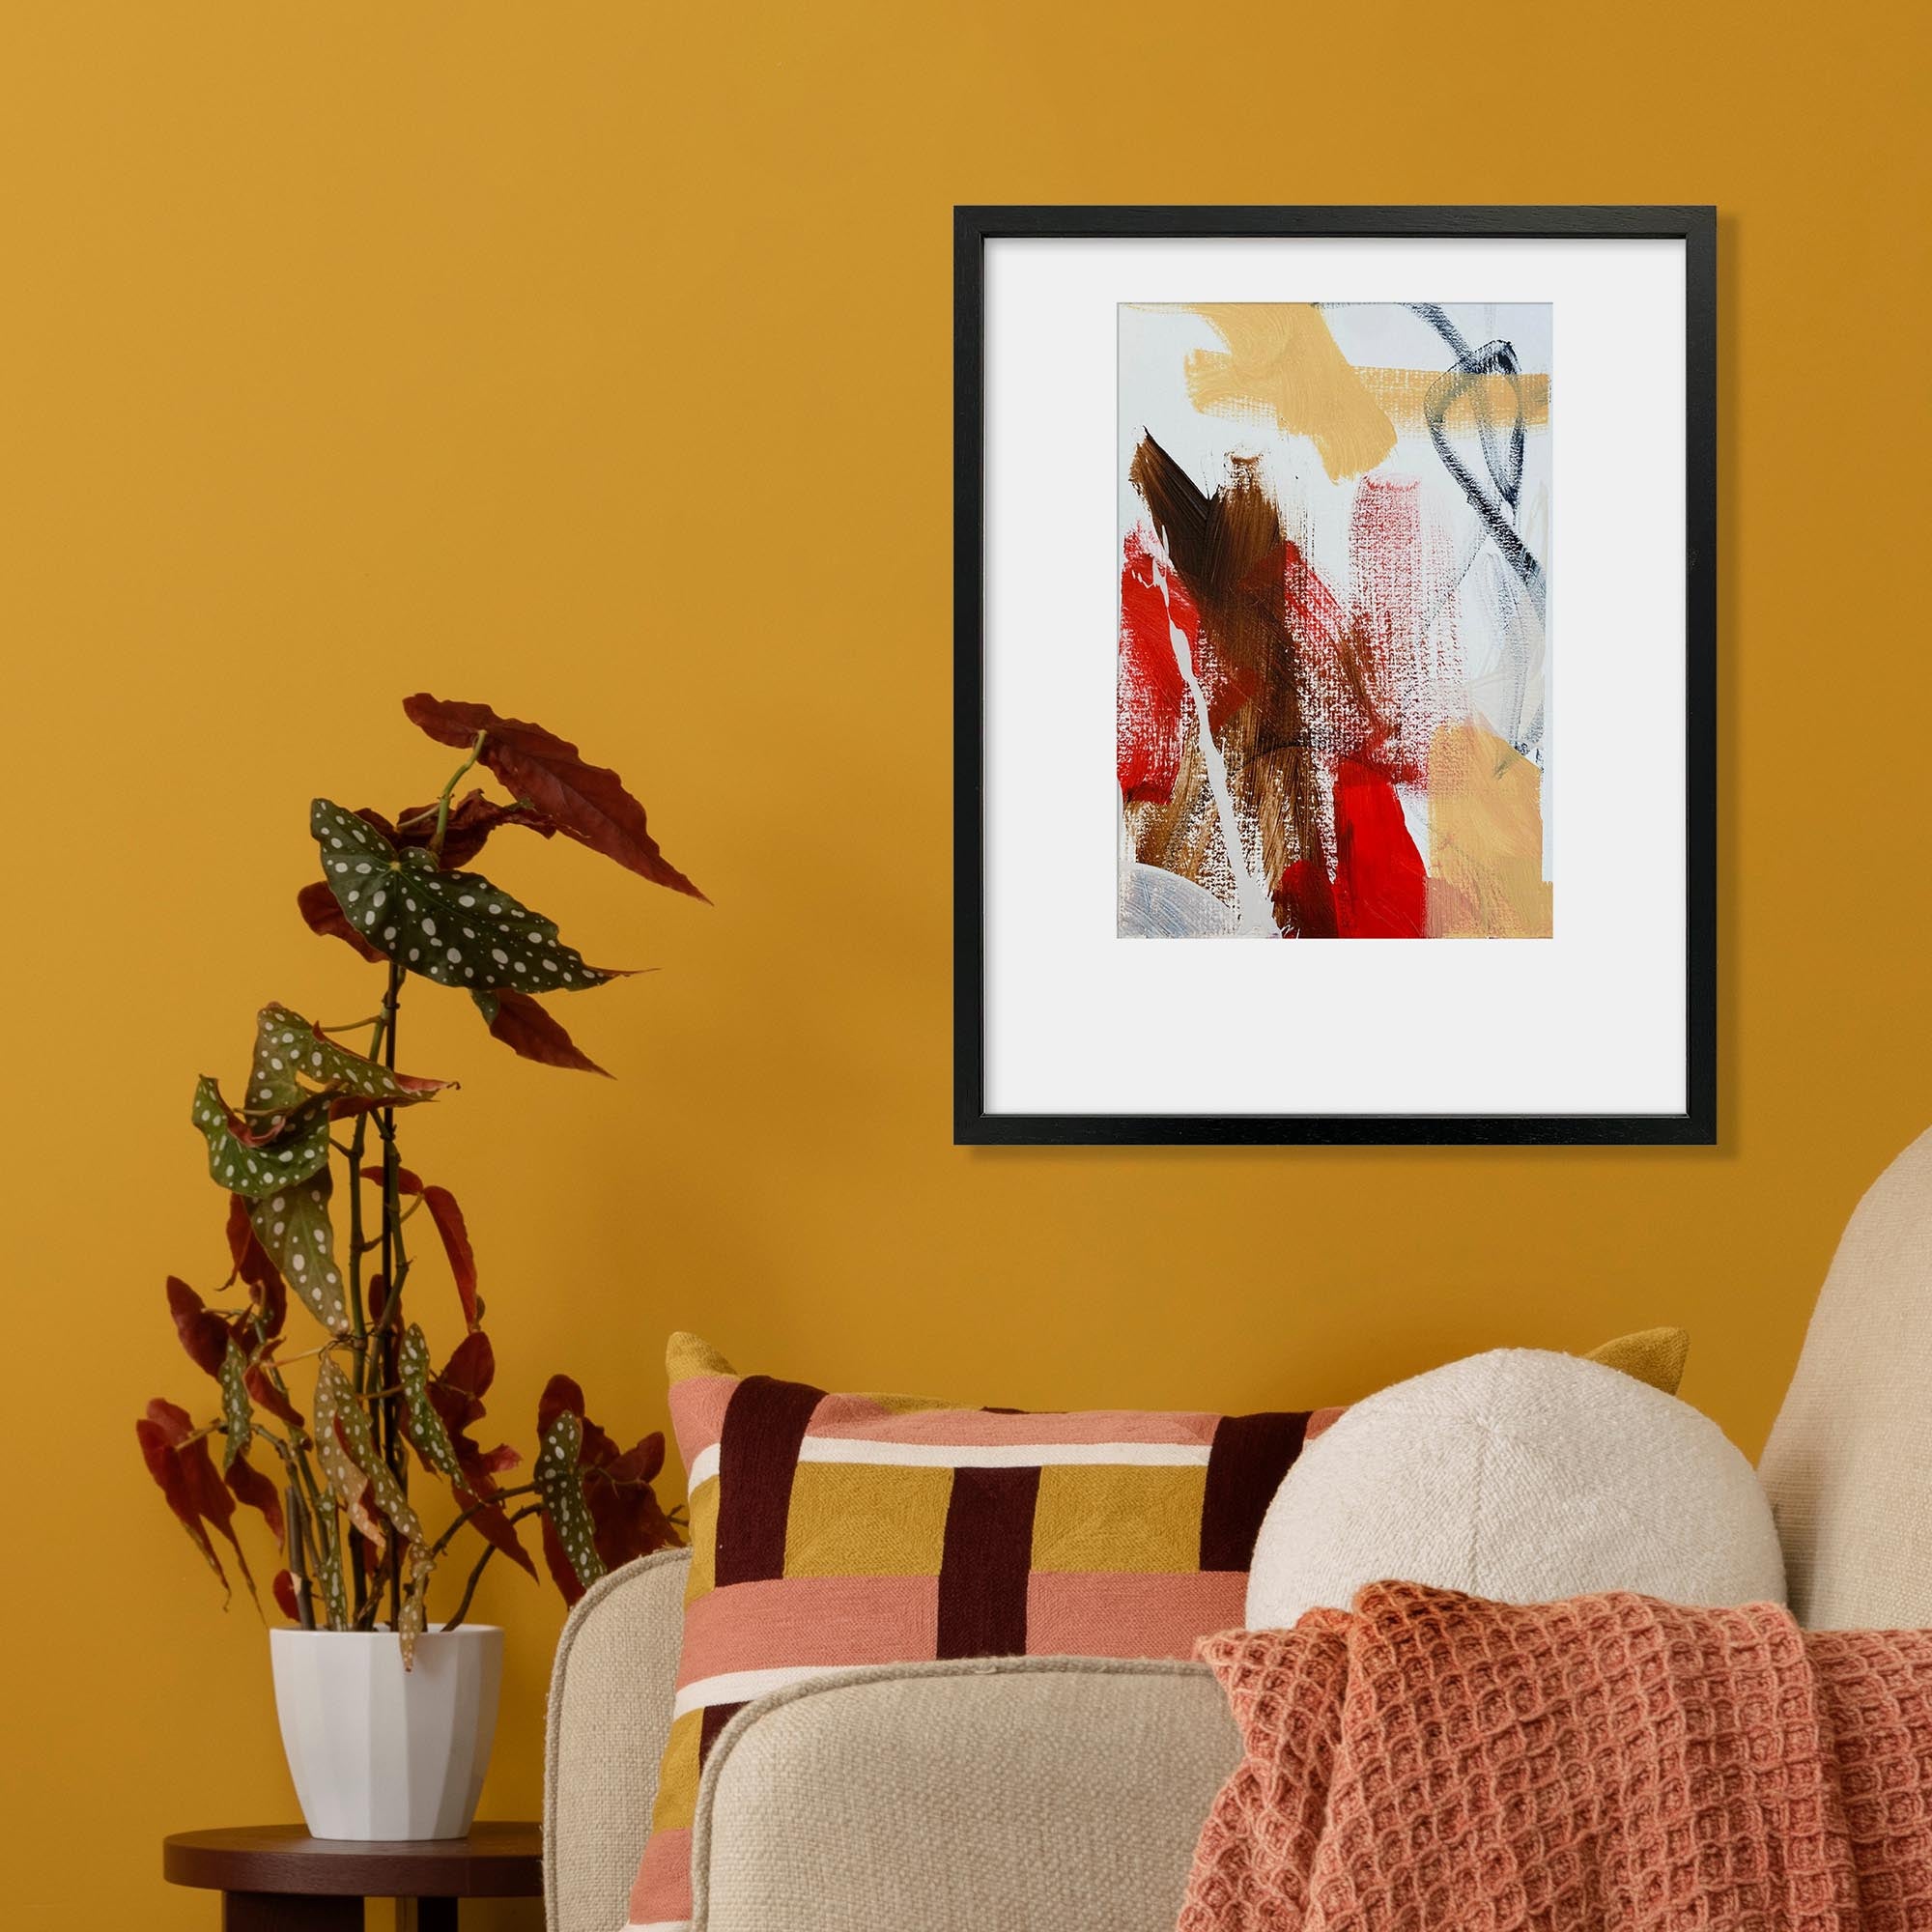 Composition 2 Framed Original Painting-Abstract House